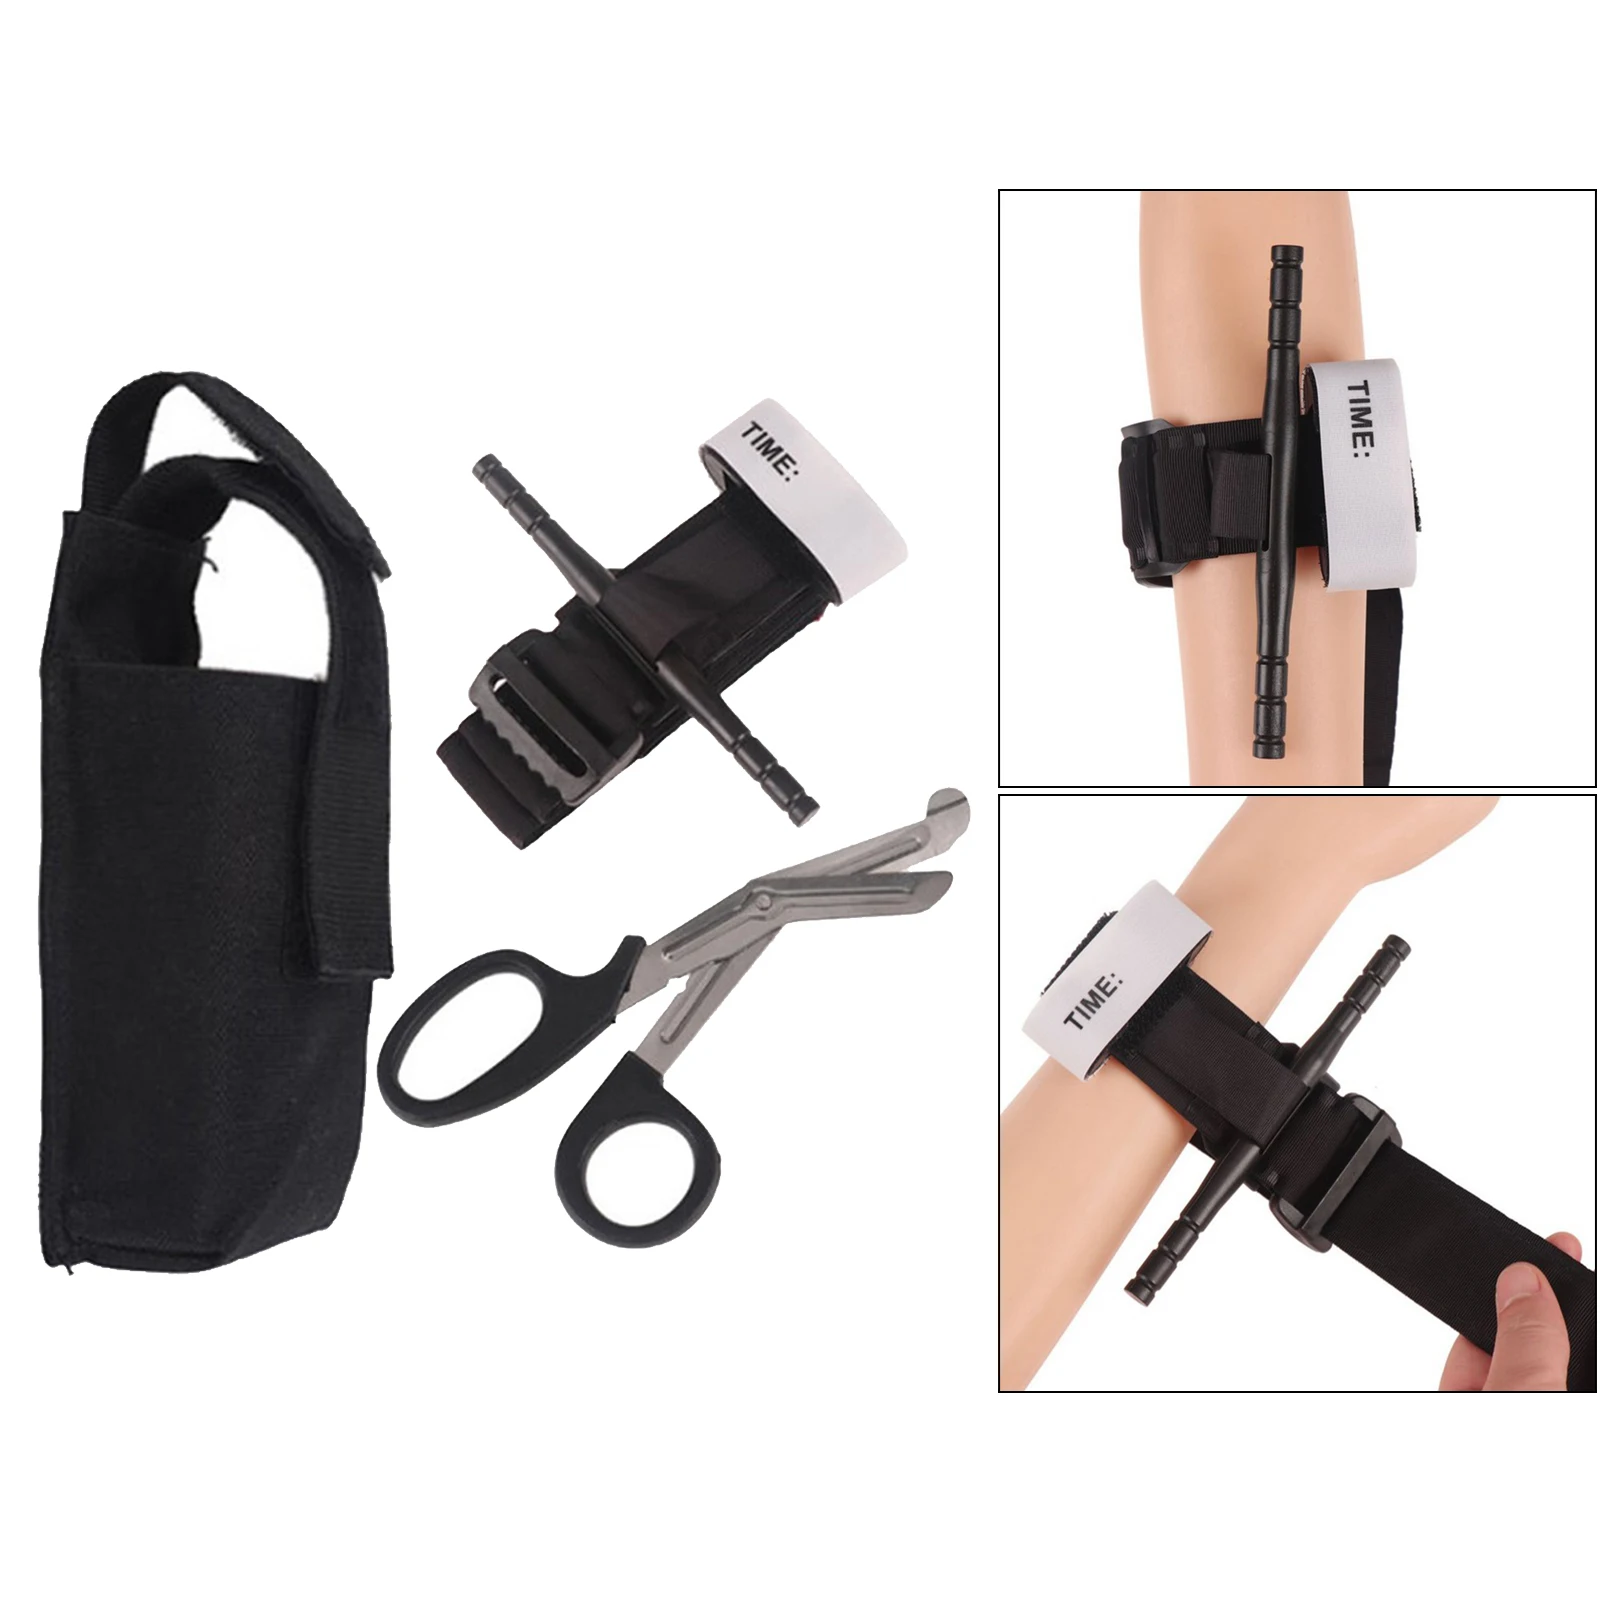 Outdoor survival tourniquet fast hemostasis Medical emergency first aid tactical military easy one-handed operation